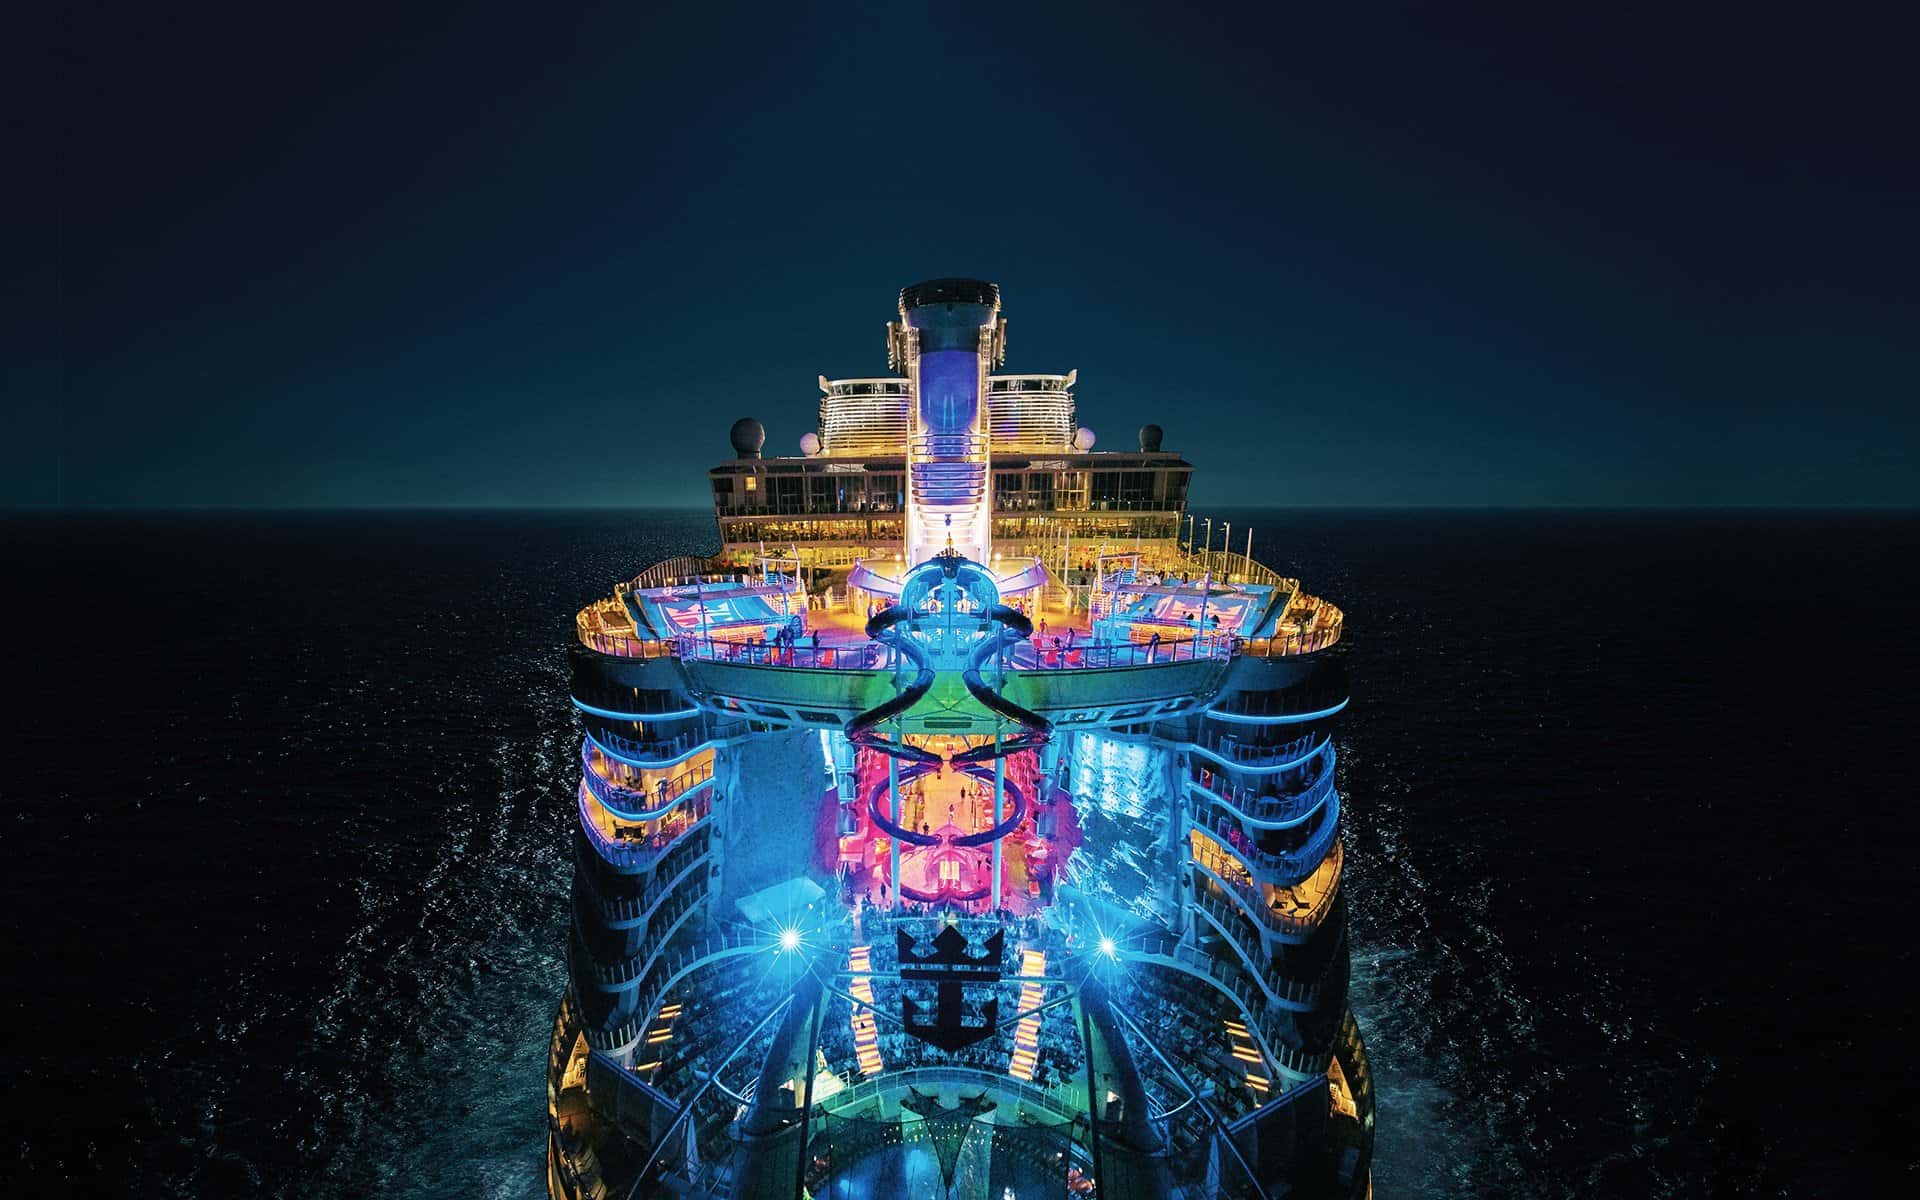 Oasis Of The Seas Wallpapers